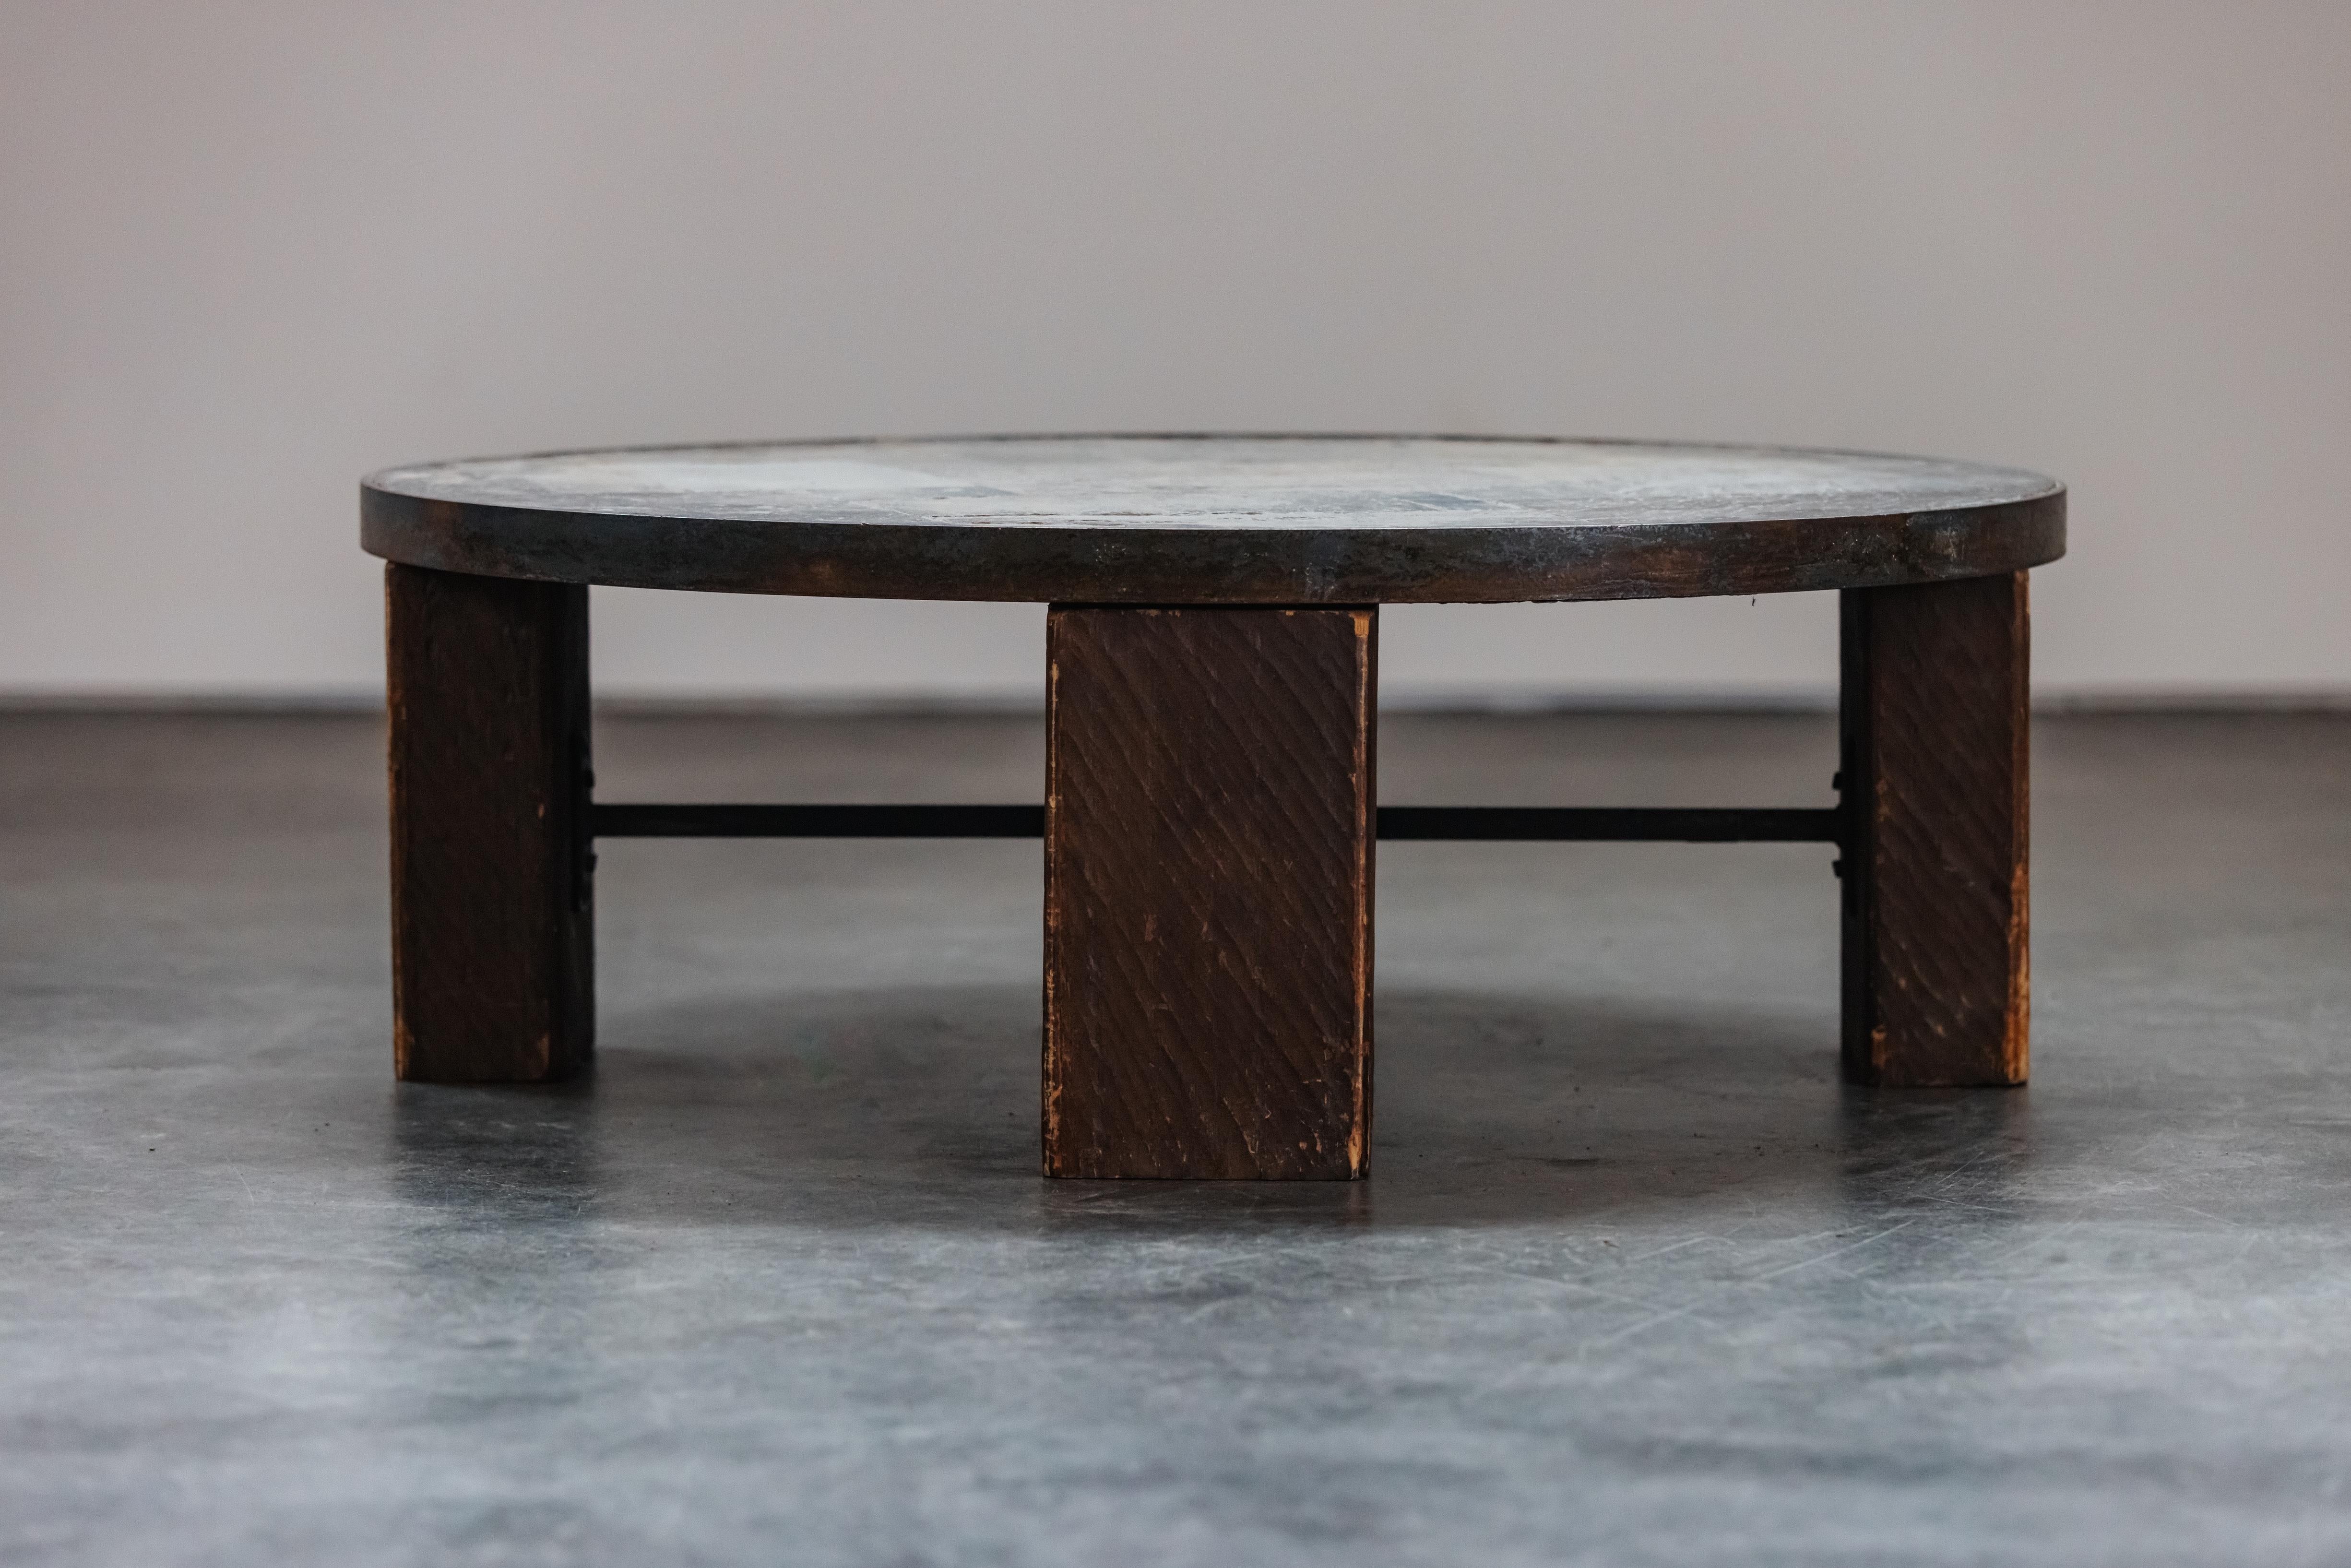 European Vintage Slate Stone Coffee Table From France, Circa 1970 For Sale